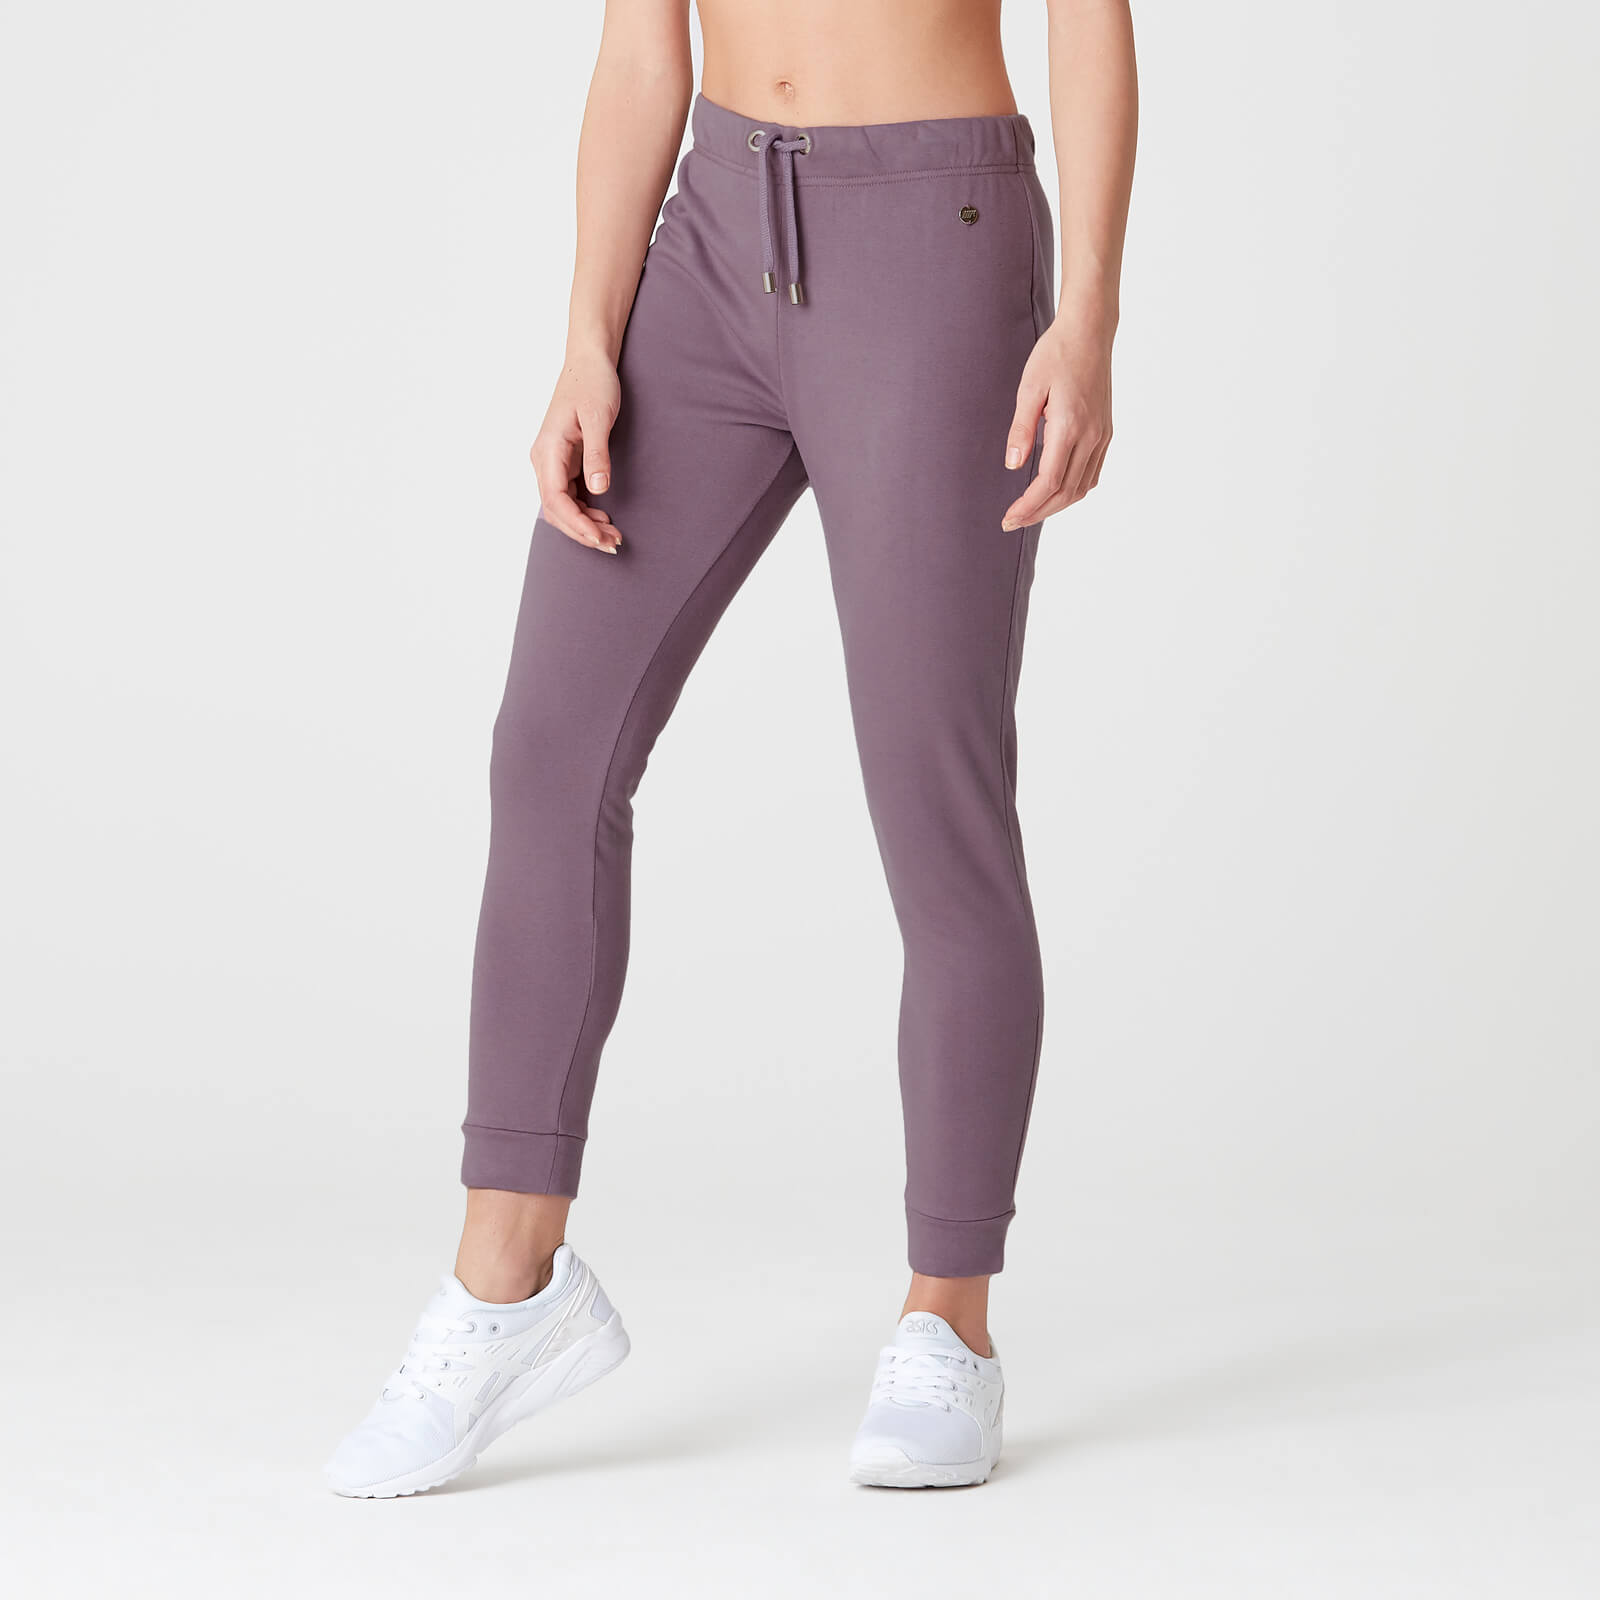 Myprotein Luxe Lounge Jogger - Mauve